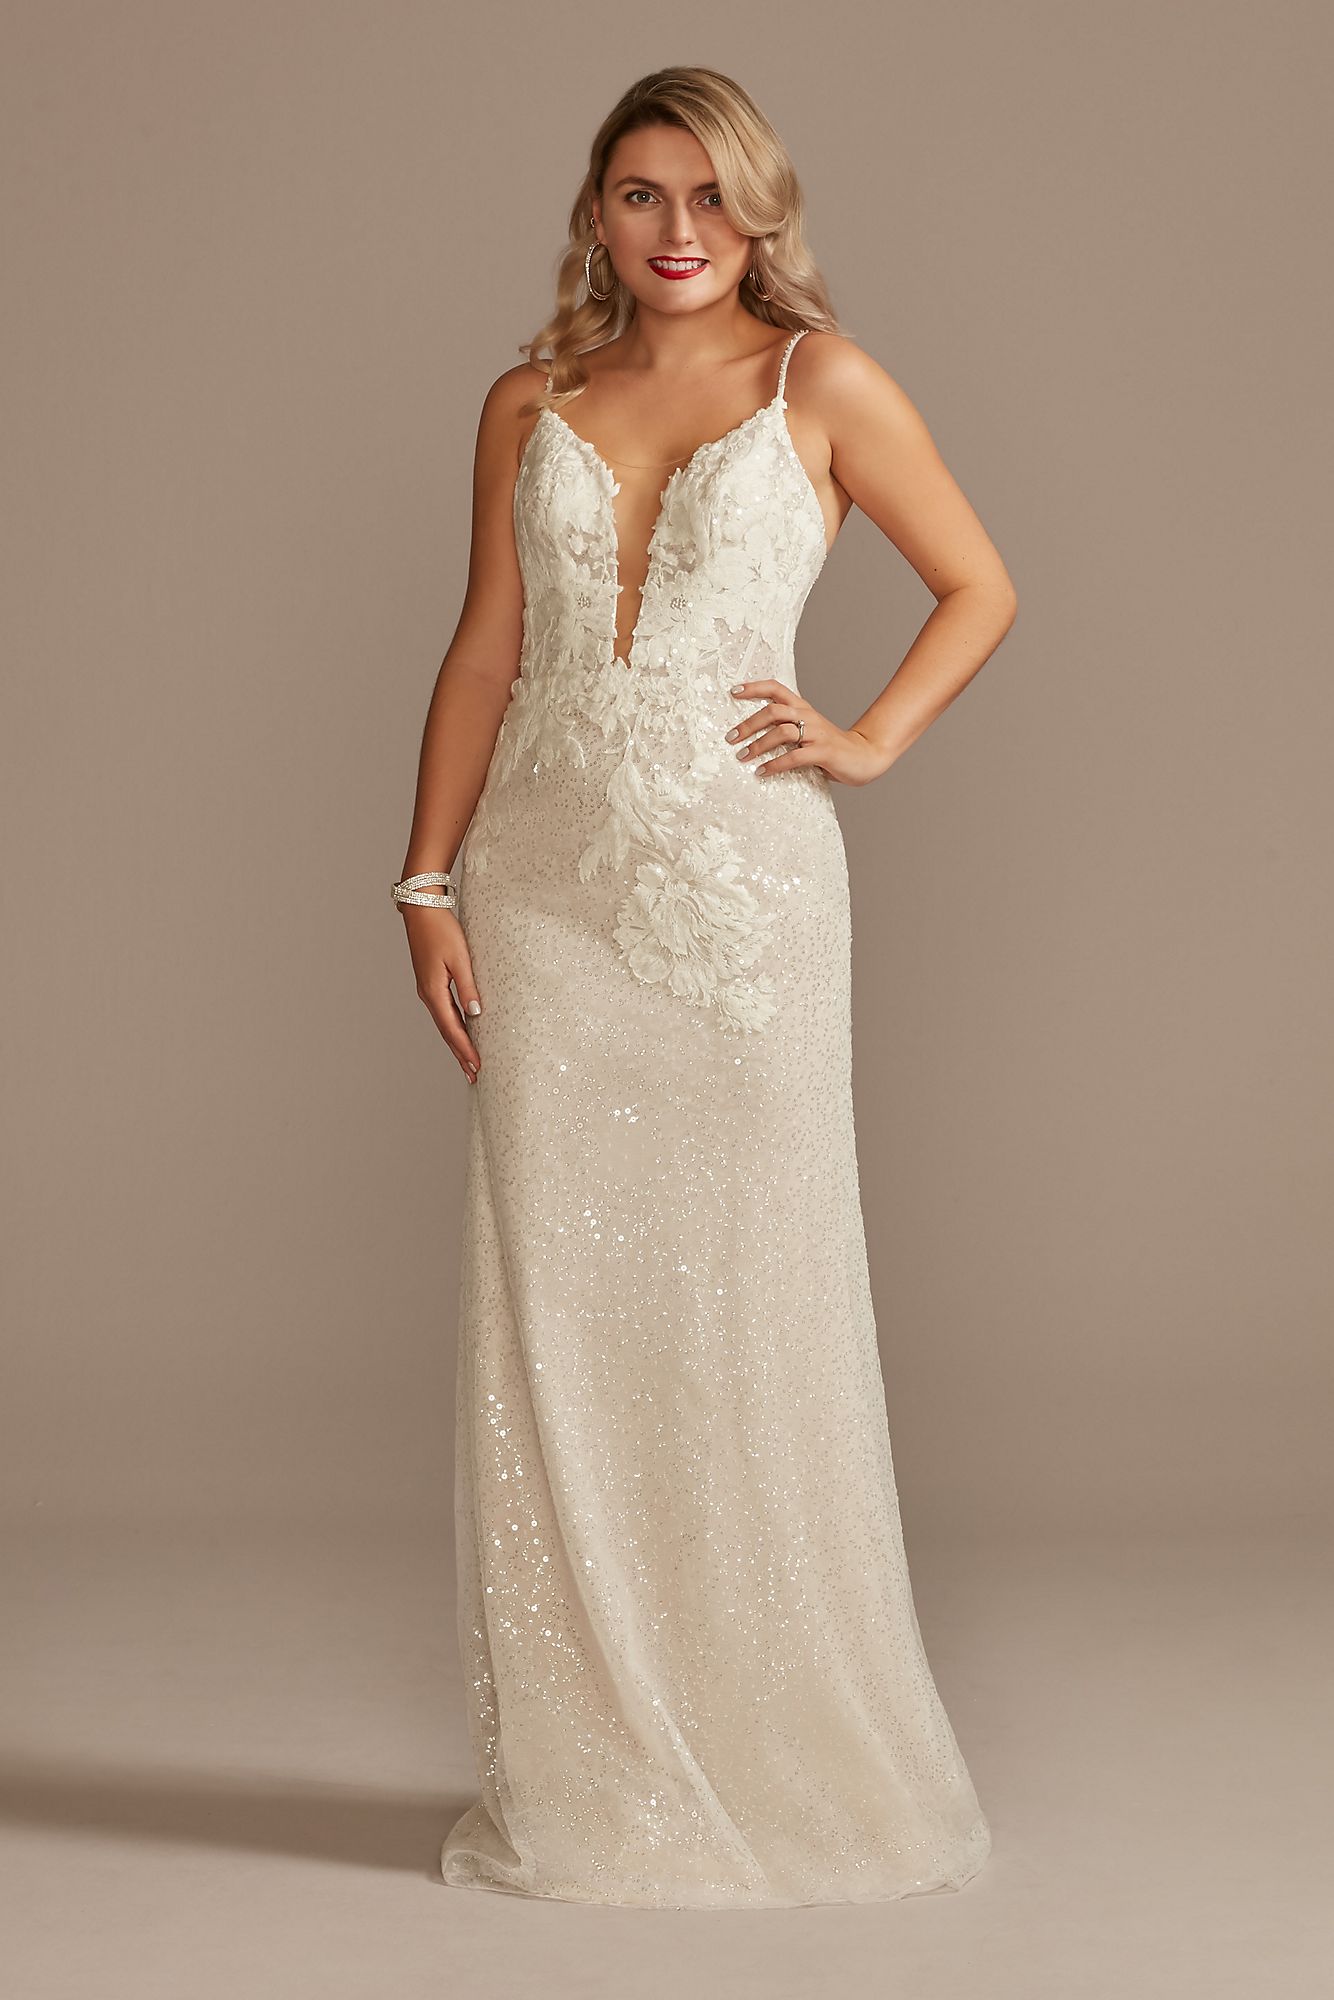 Sequin Applique Wedding Dress with Removable Train Galina Signature SWG882